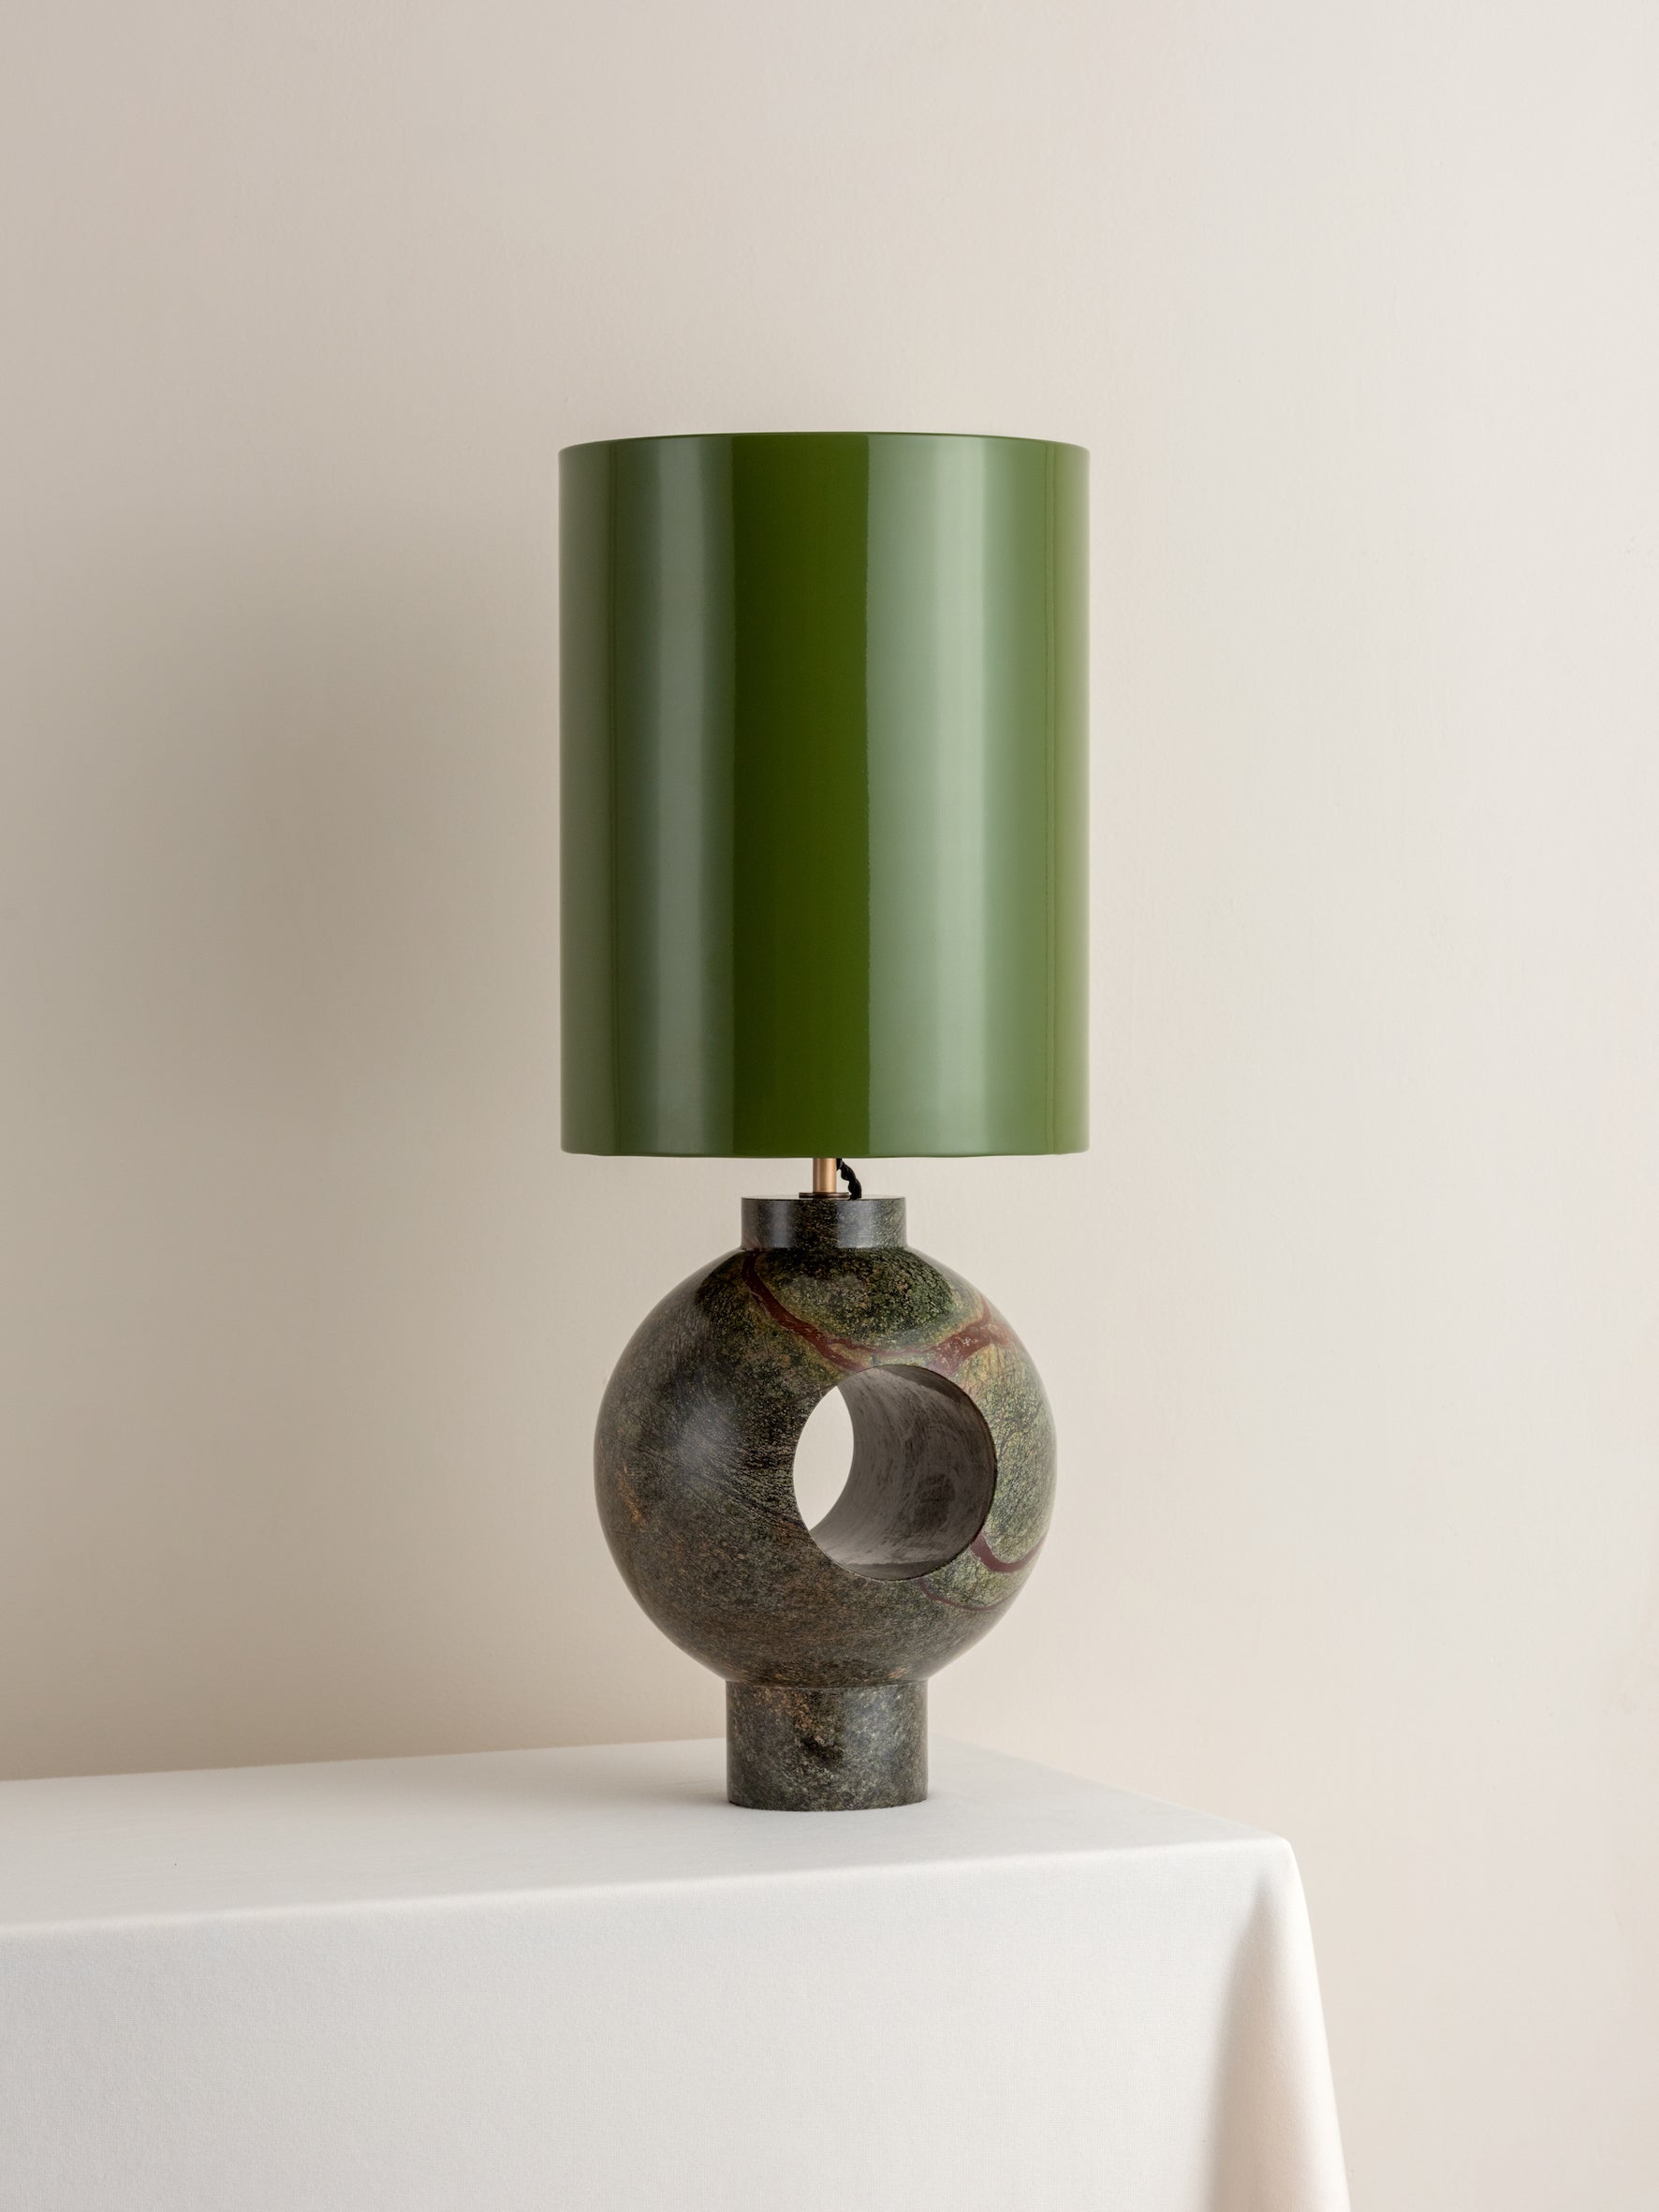 Editions marble lamp with + green lacquer shade | Table Lamp | Lights & Lamps | UK | Modern Affordable Designer Lighting